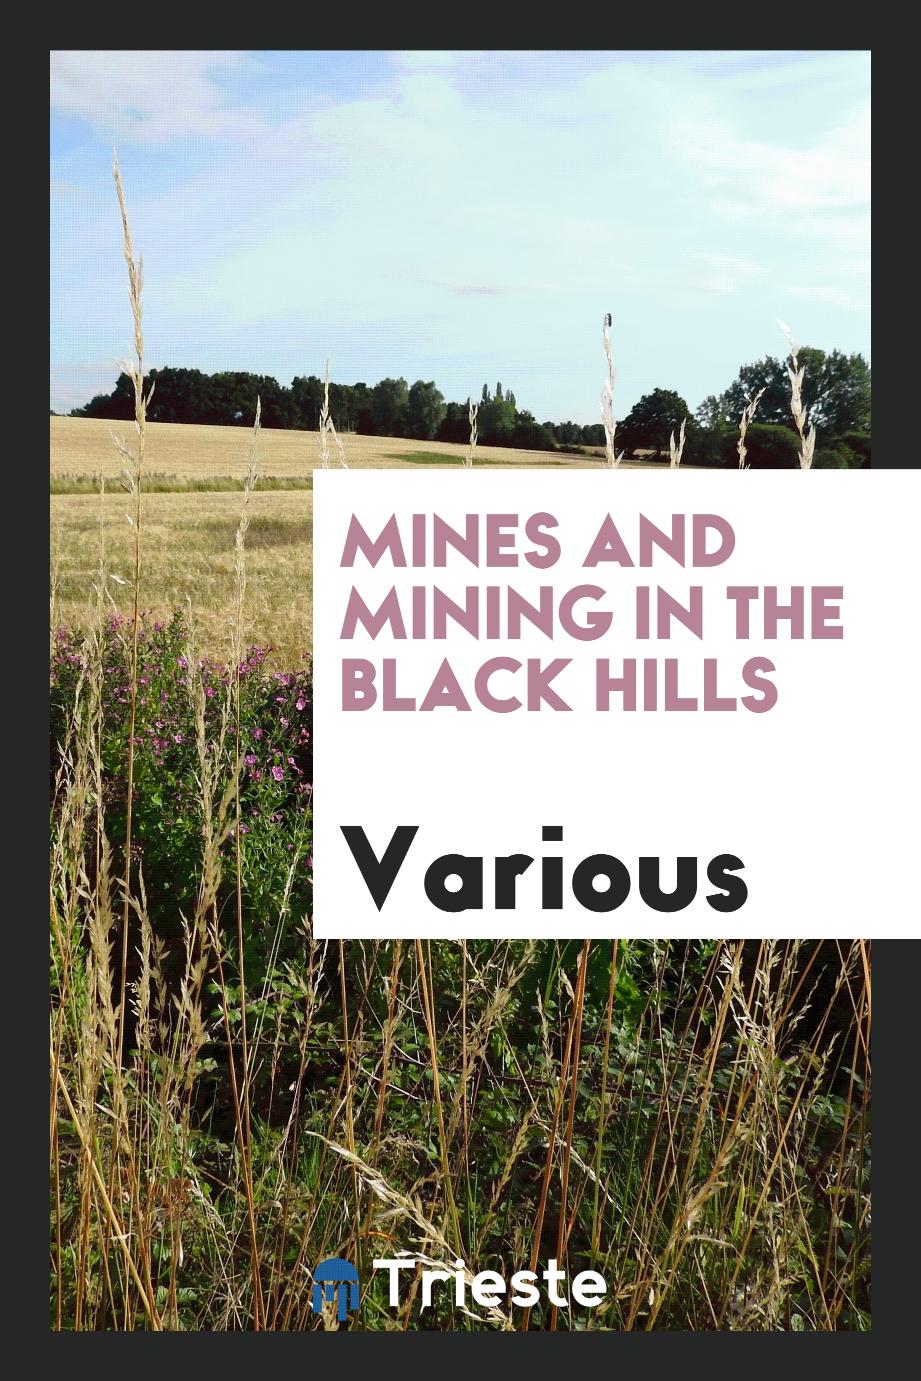 Mines and Mining in the Black Hills